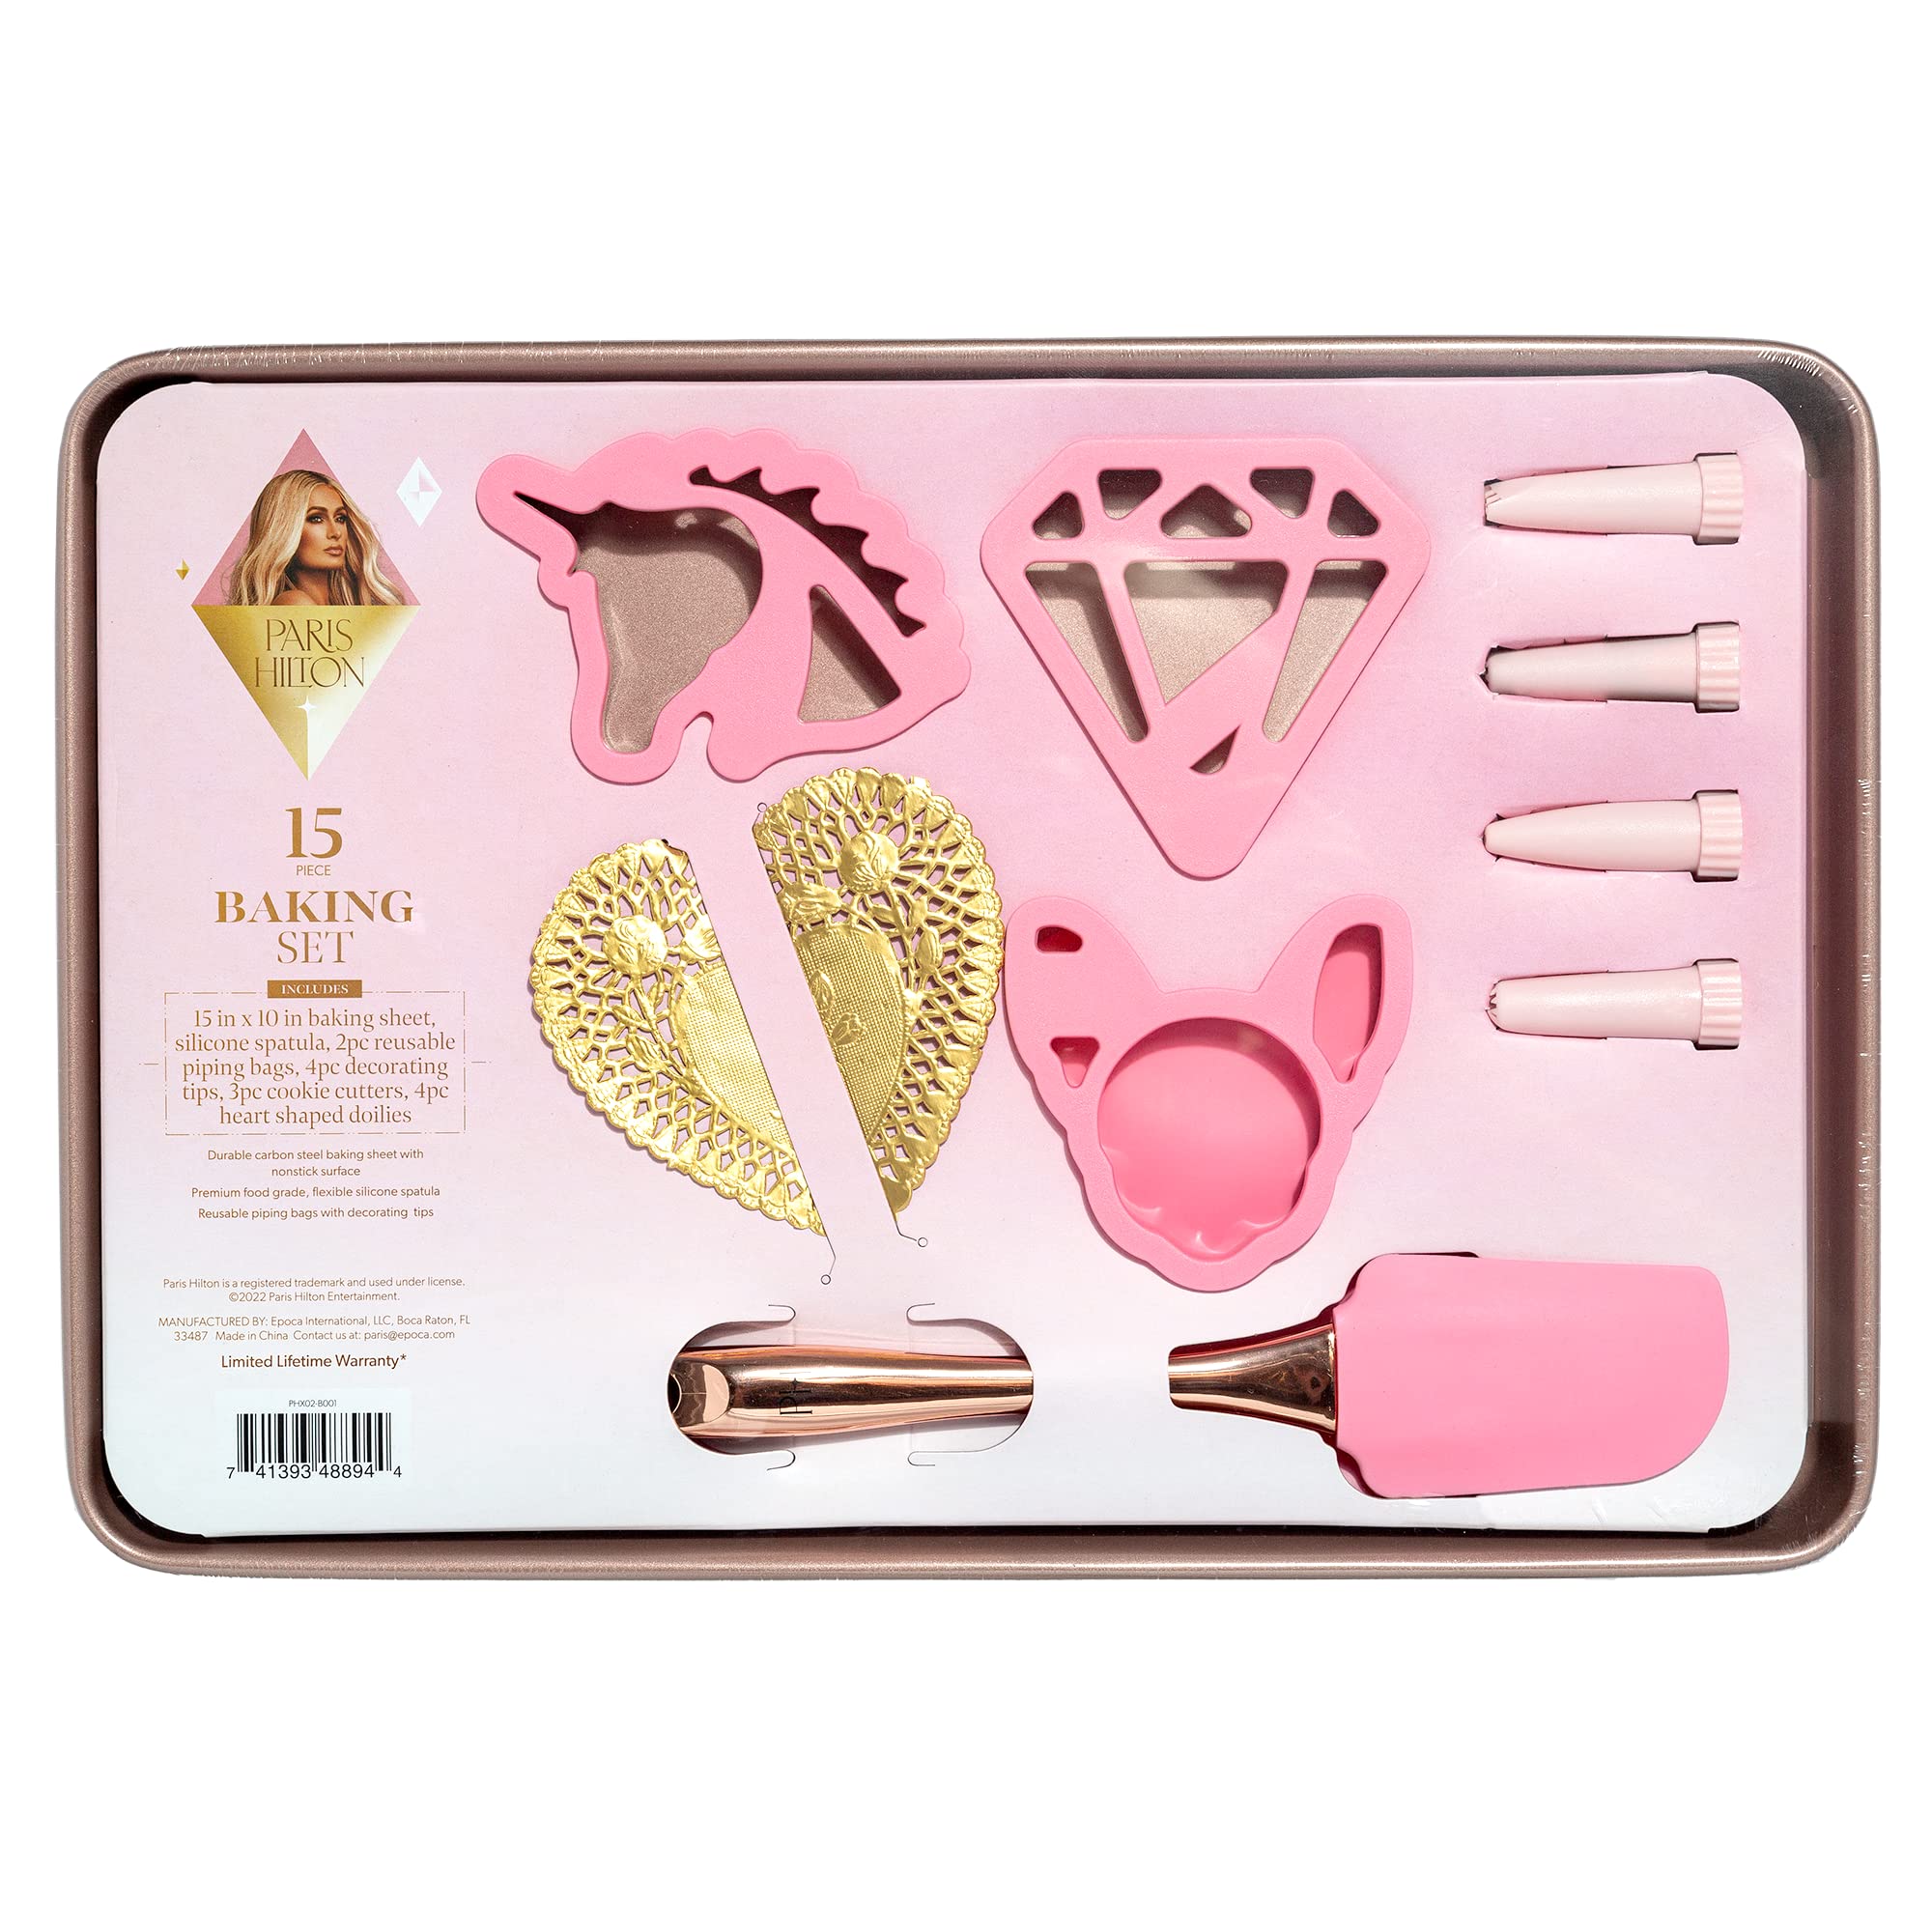 Paris Hilton Cookie Decorating Set with Nonstick Cookie Baking Sheet, Iconic Cookie Cutter Shapes, Reusable Piping Bags and Decorating Tips, Silicone Spatula, Pink